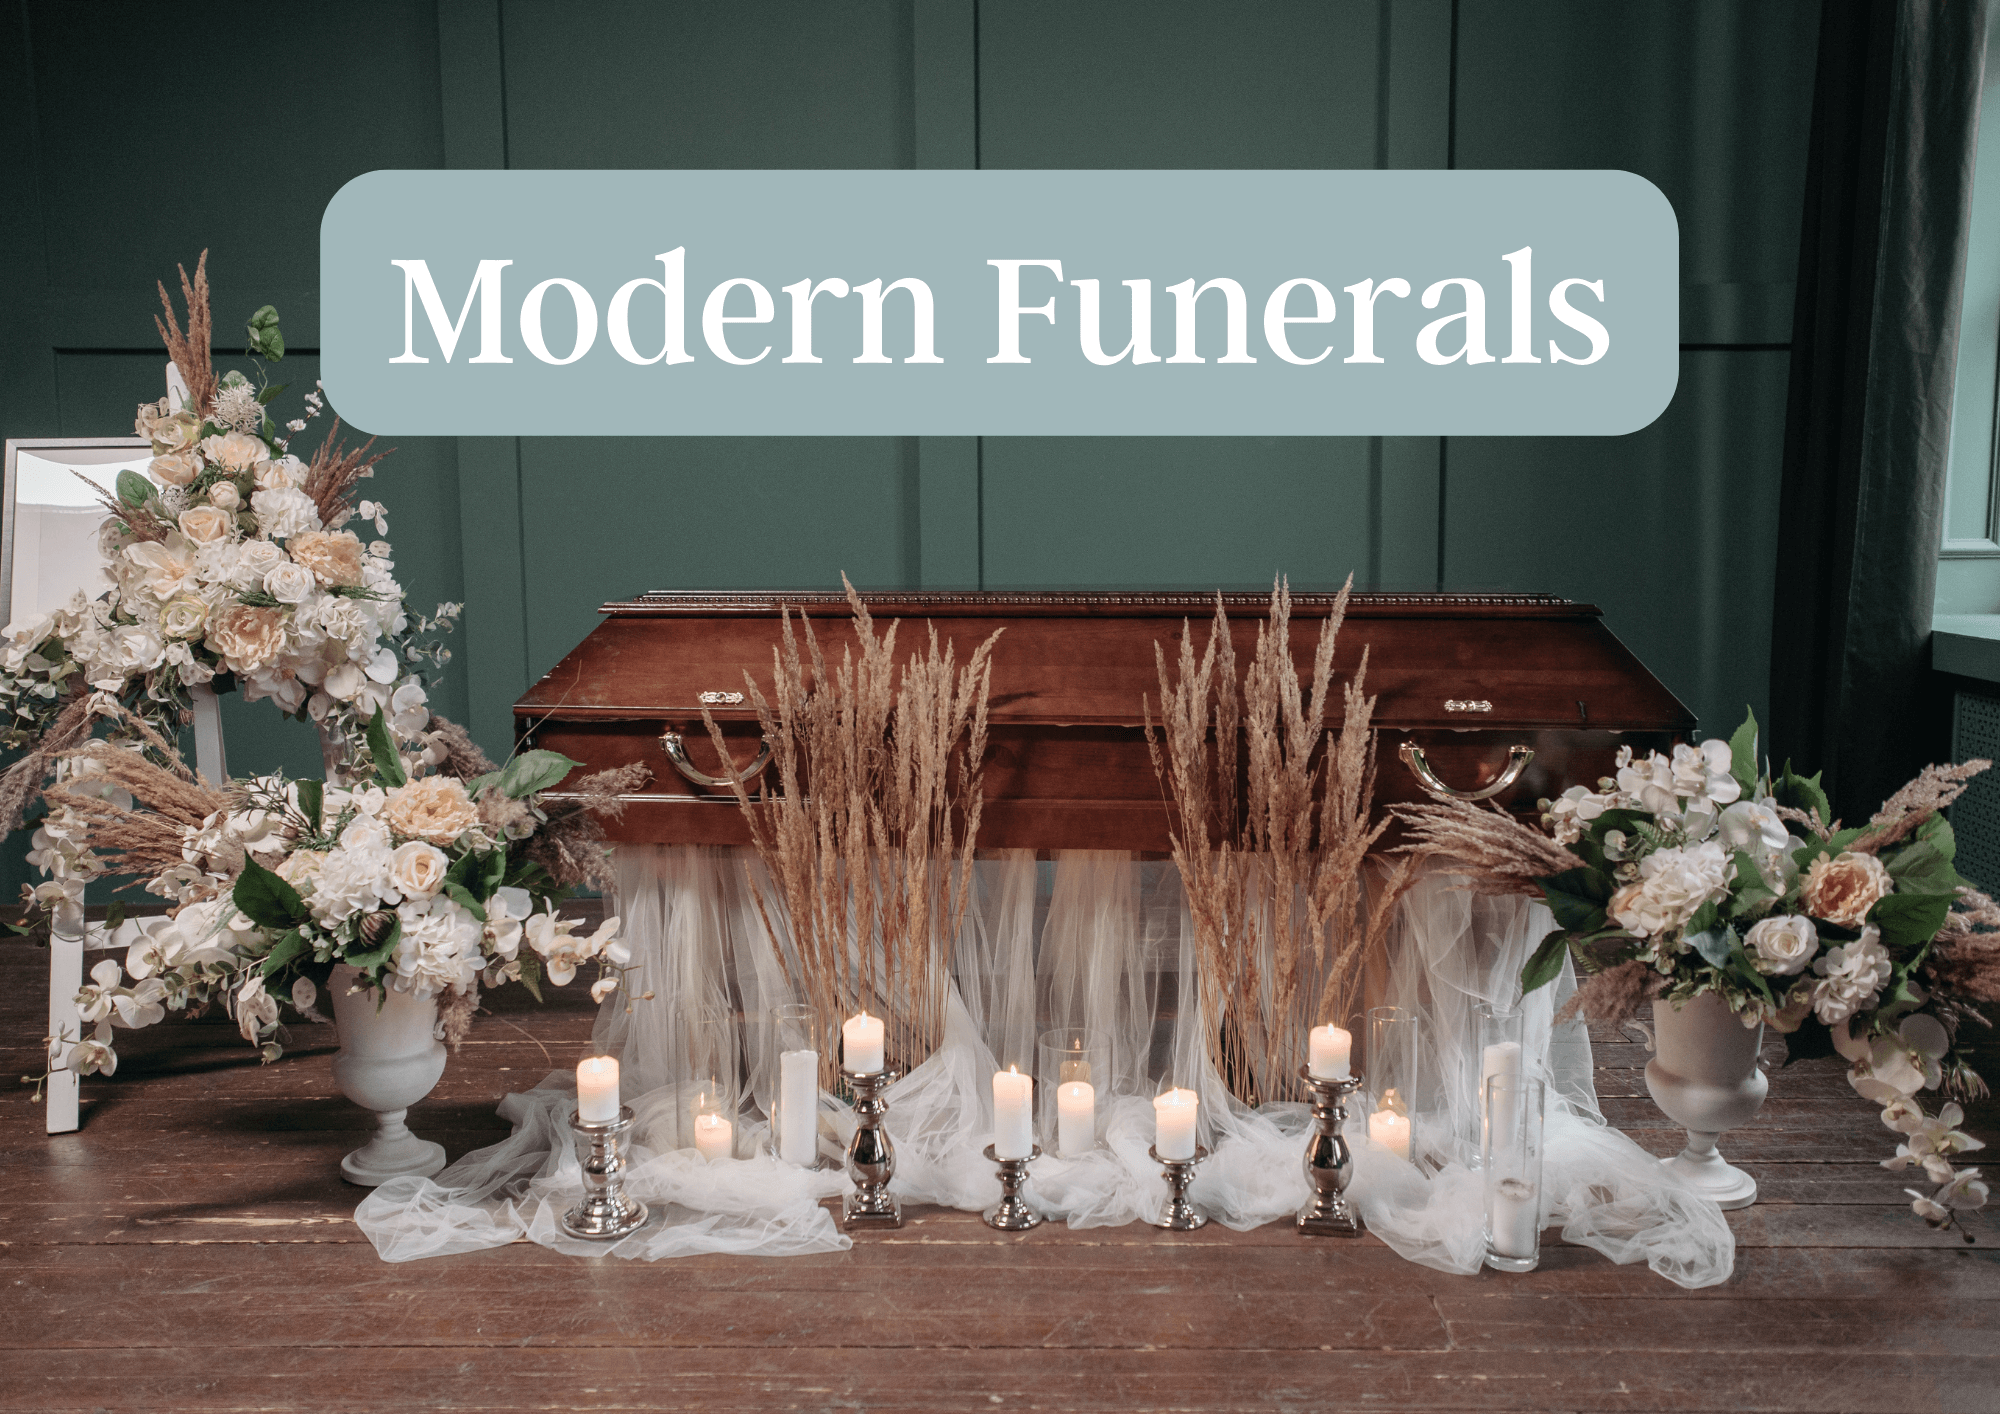 rustic wooden table with florals, pampas grass and candle decor on the floor